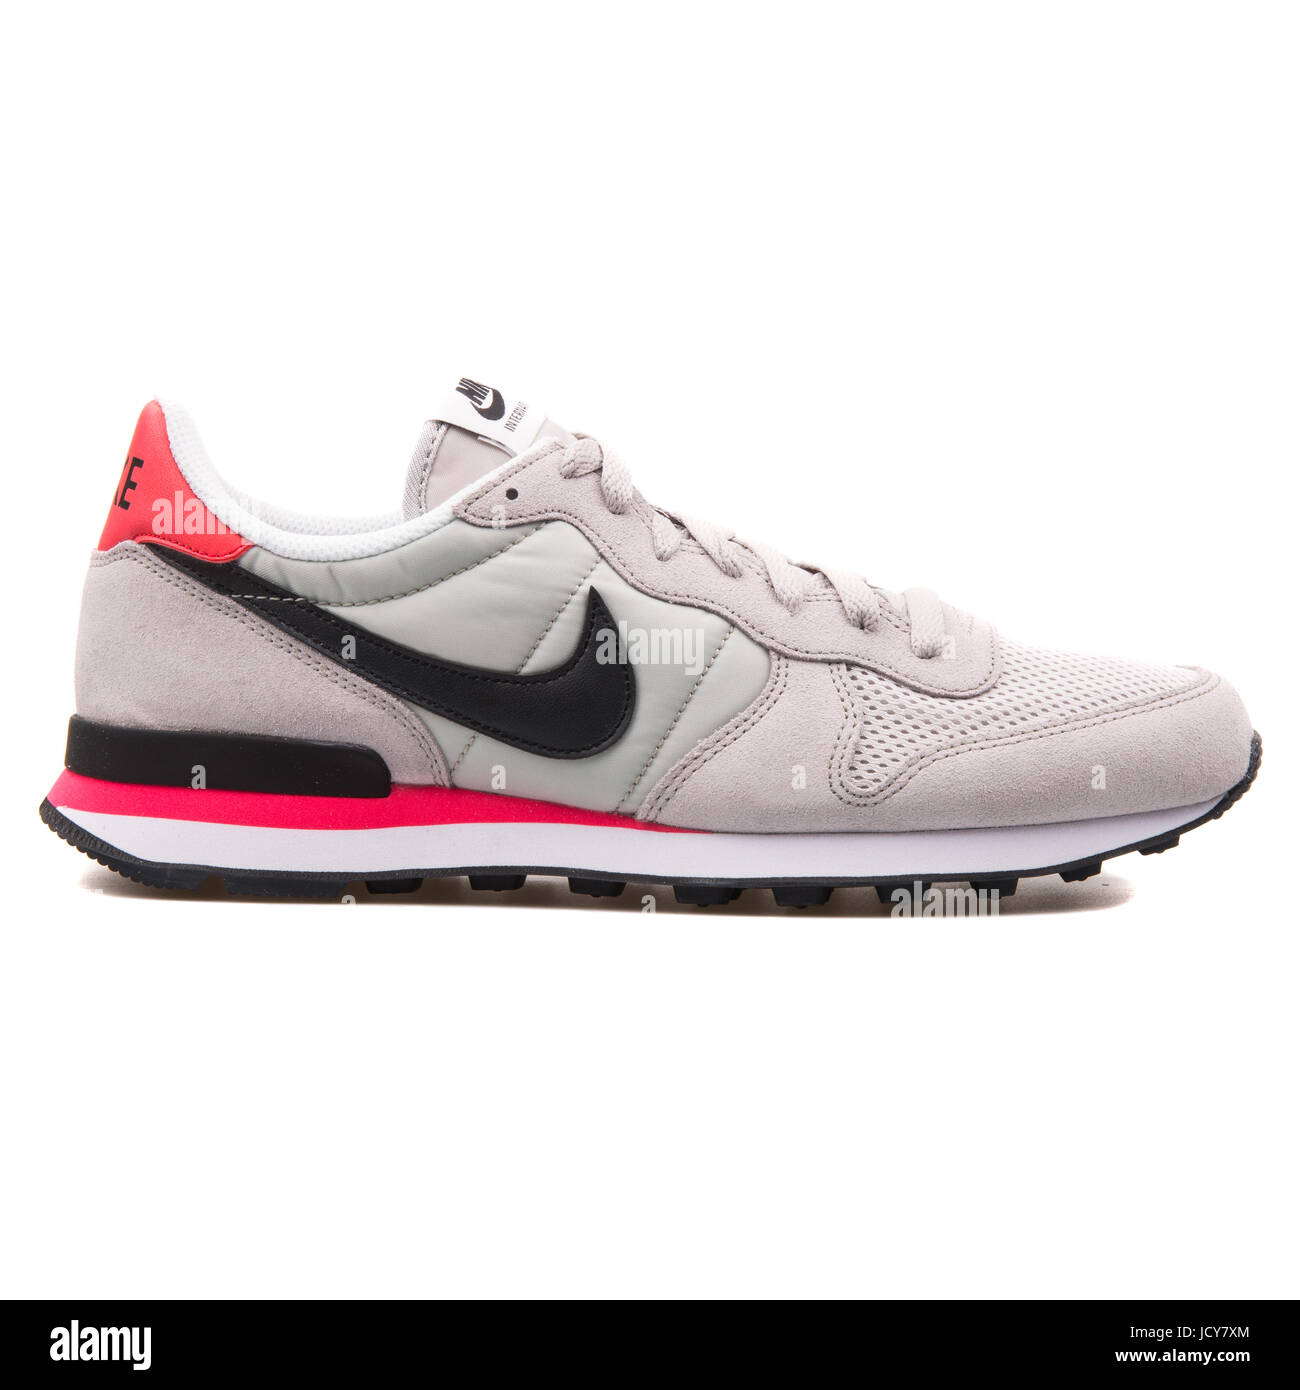 Nike Internationalist Neutral Grey, Black and infra Red Men's Running Shoes  - 631754-006 Stock Photo - Alamy